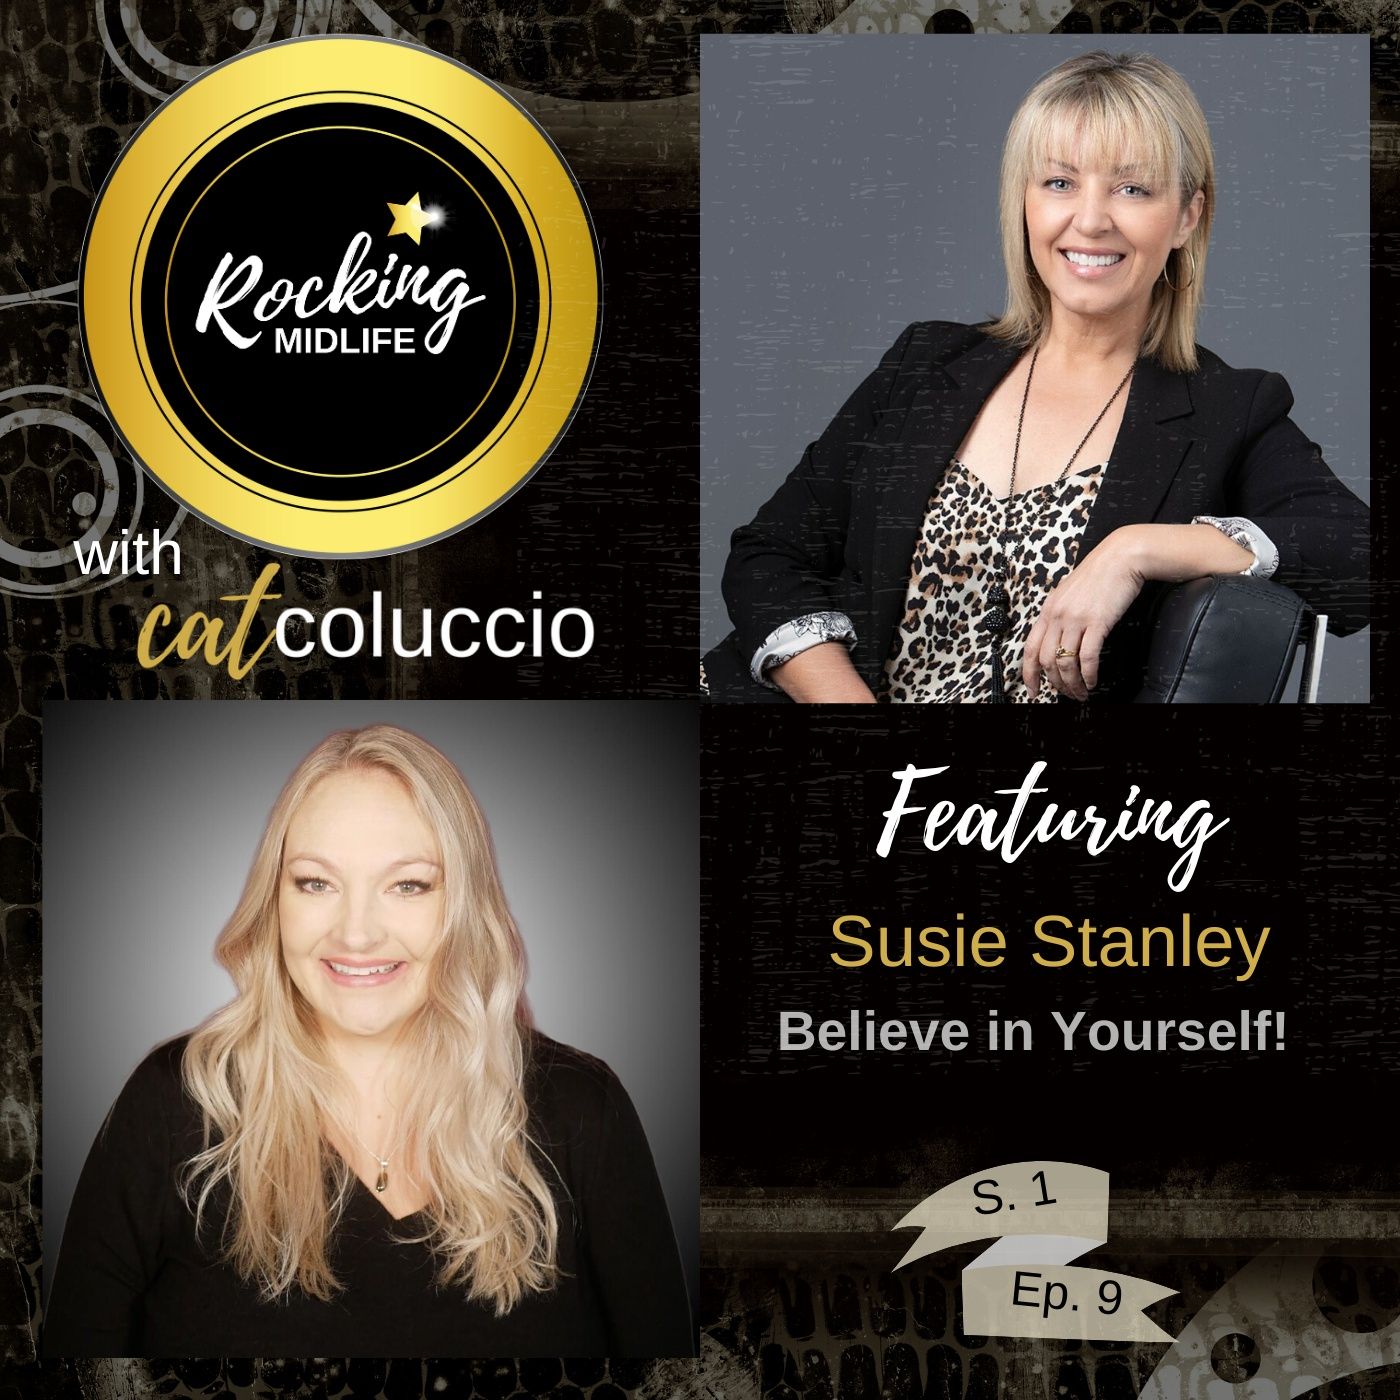 Rocking Midlife with Susie Stanley